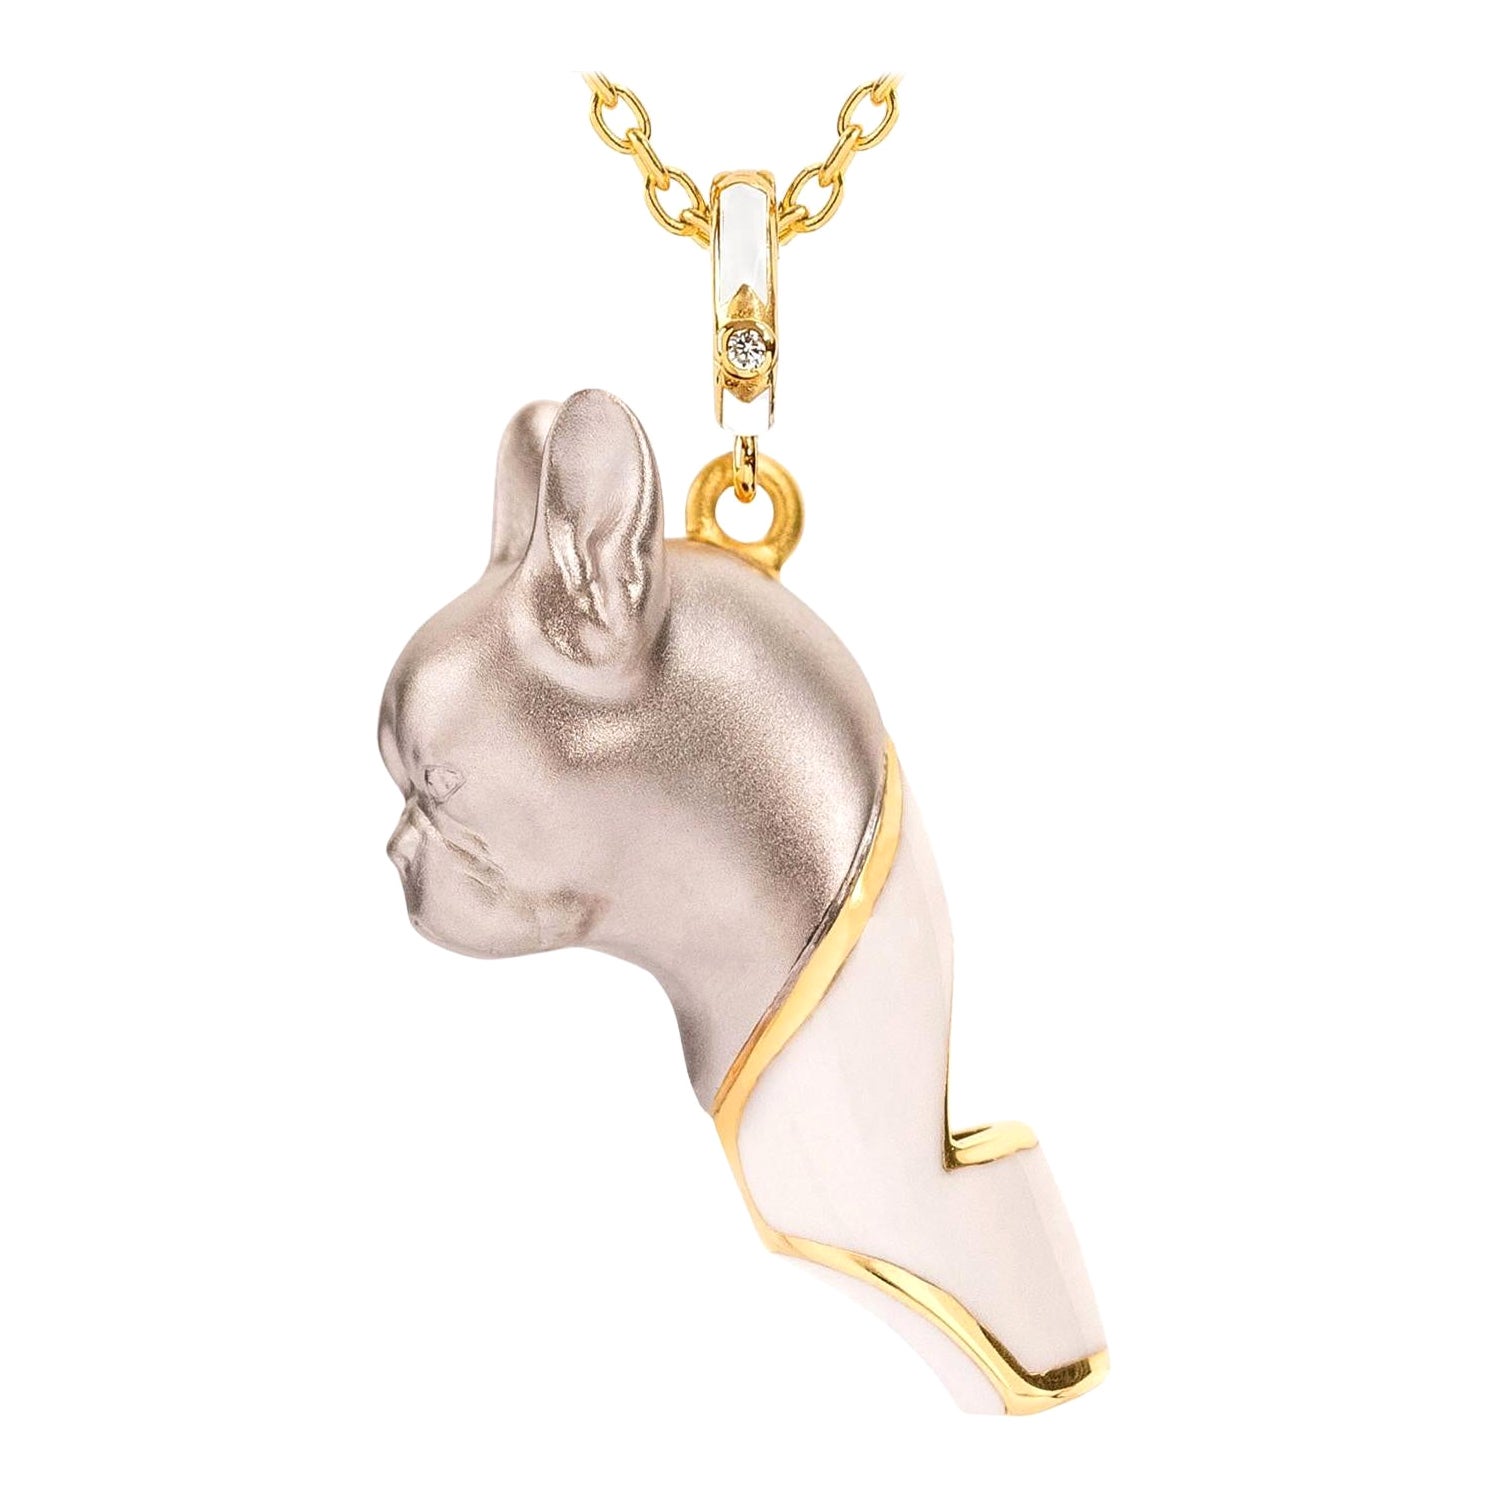 J'ADMIRE 14K Yellow Gold Plated Sterling Silver French Bulldog Puppy Pendant  Necklace - 134RQA